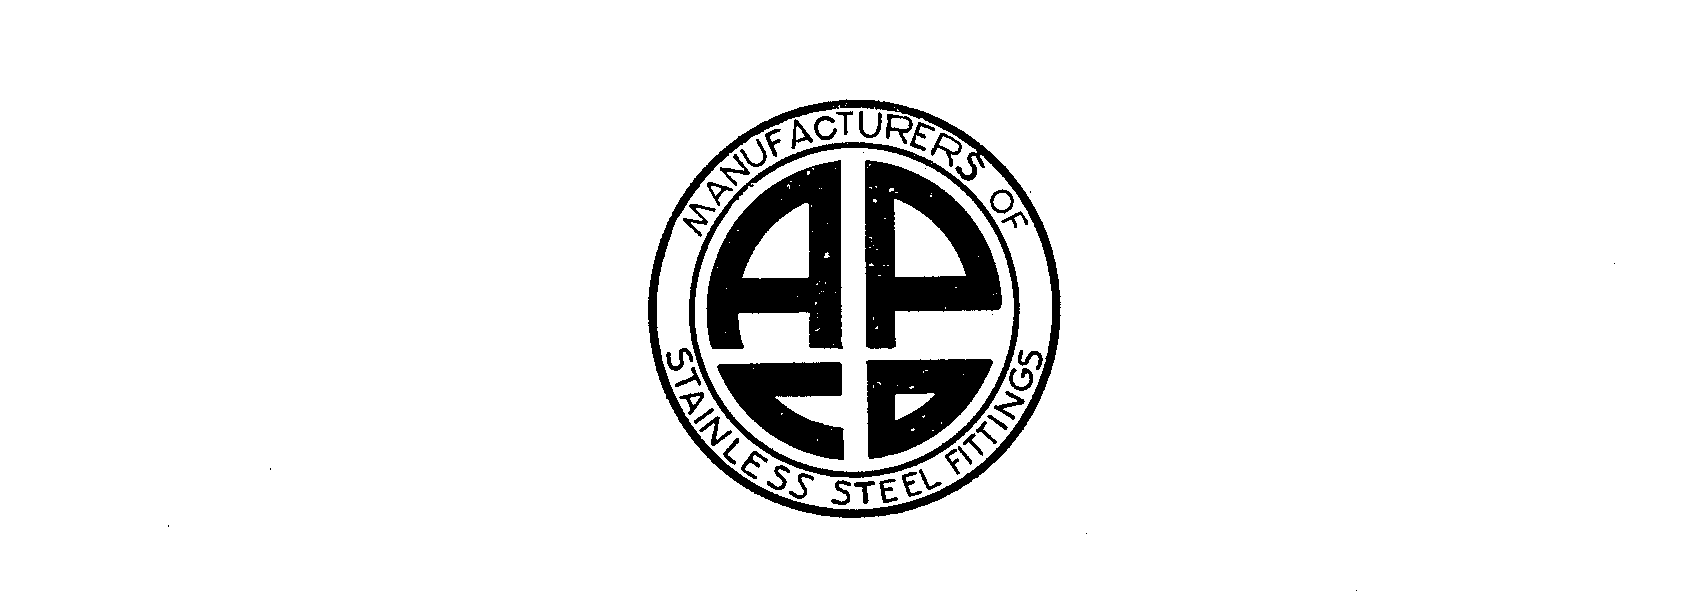  APCO MANUFACTURERS OF STAINLESS STEEL FITTINGS